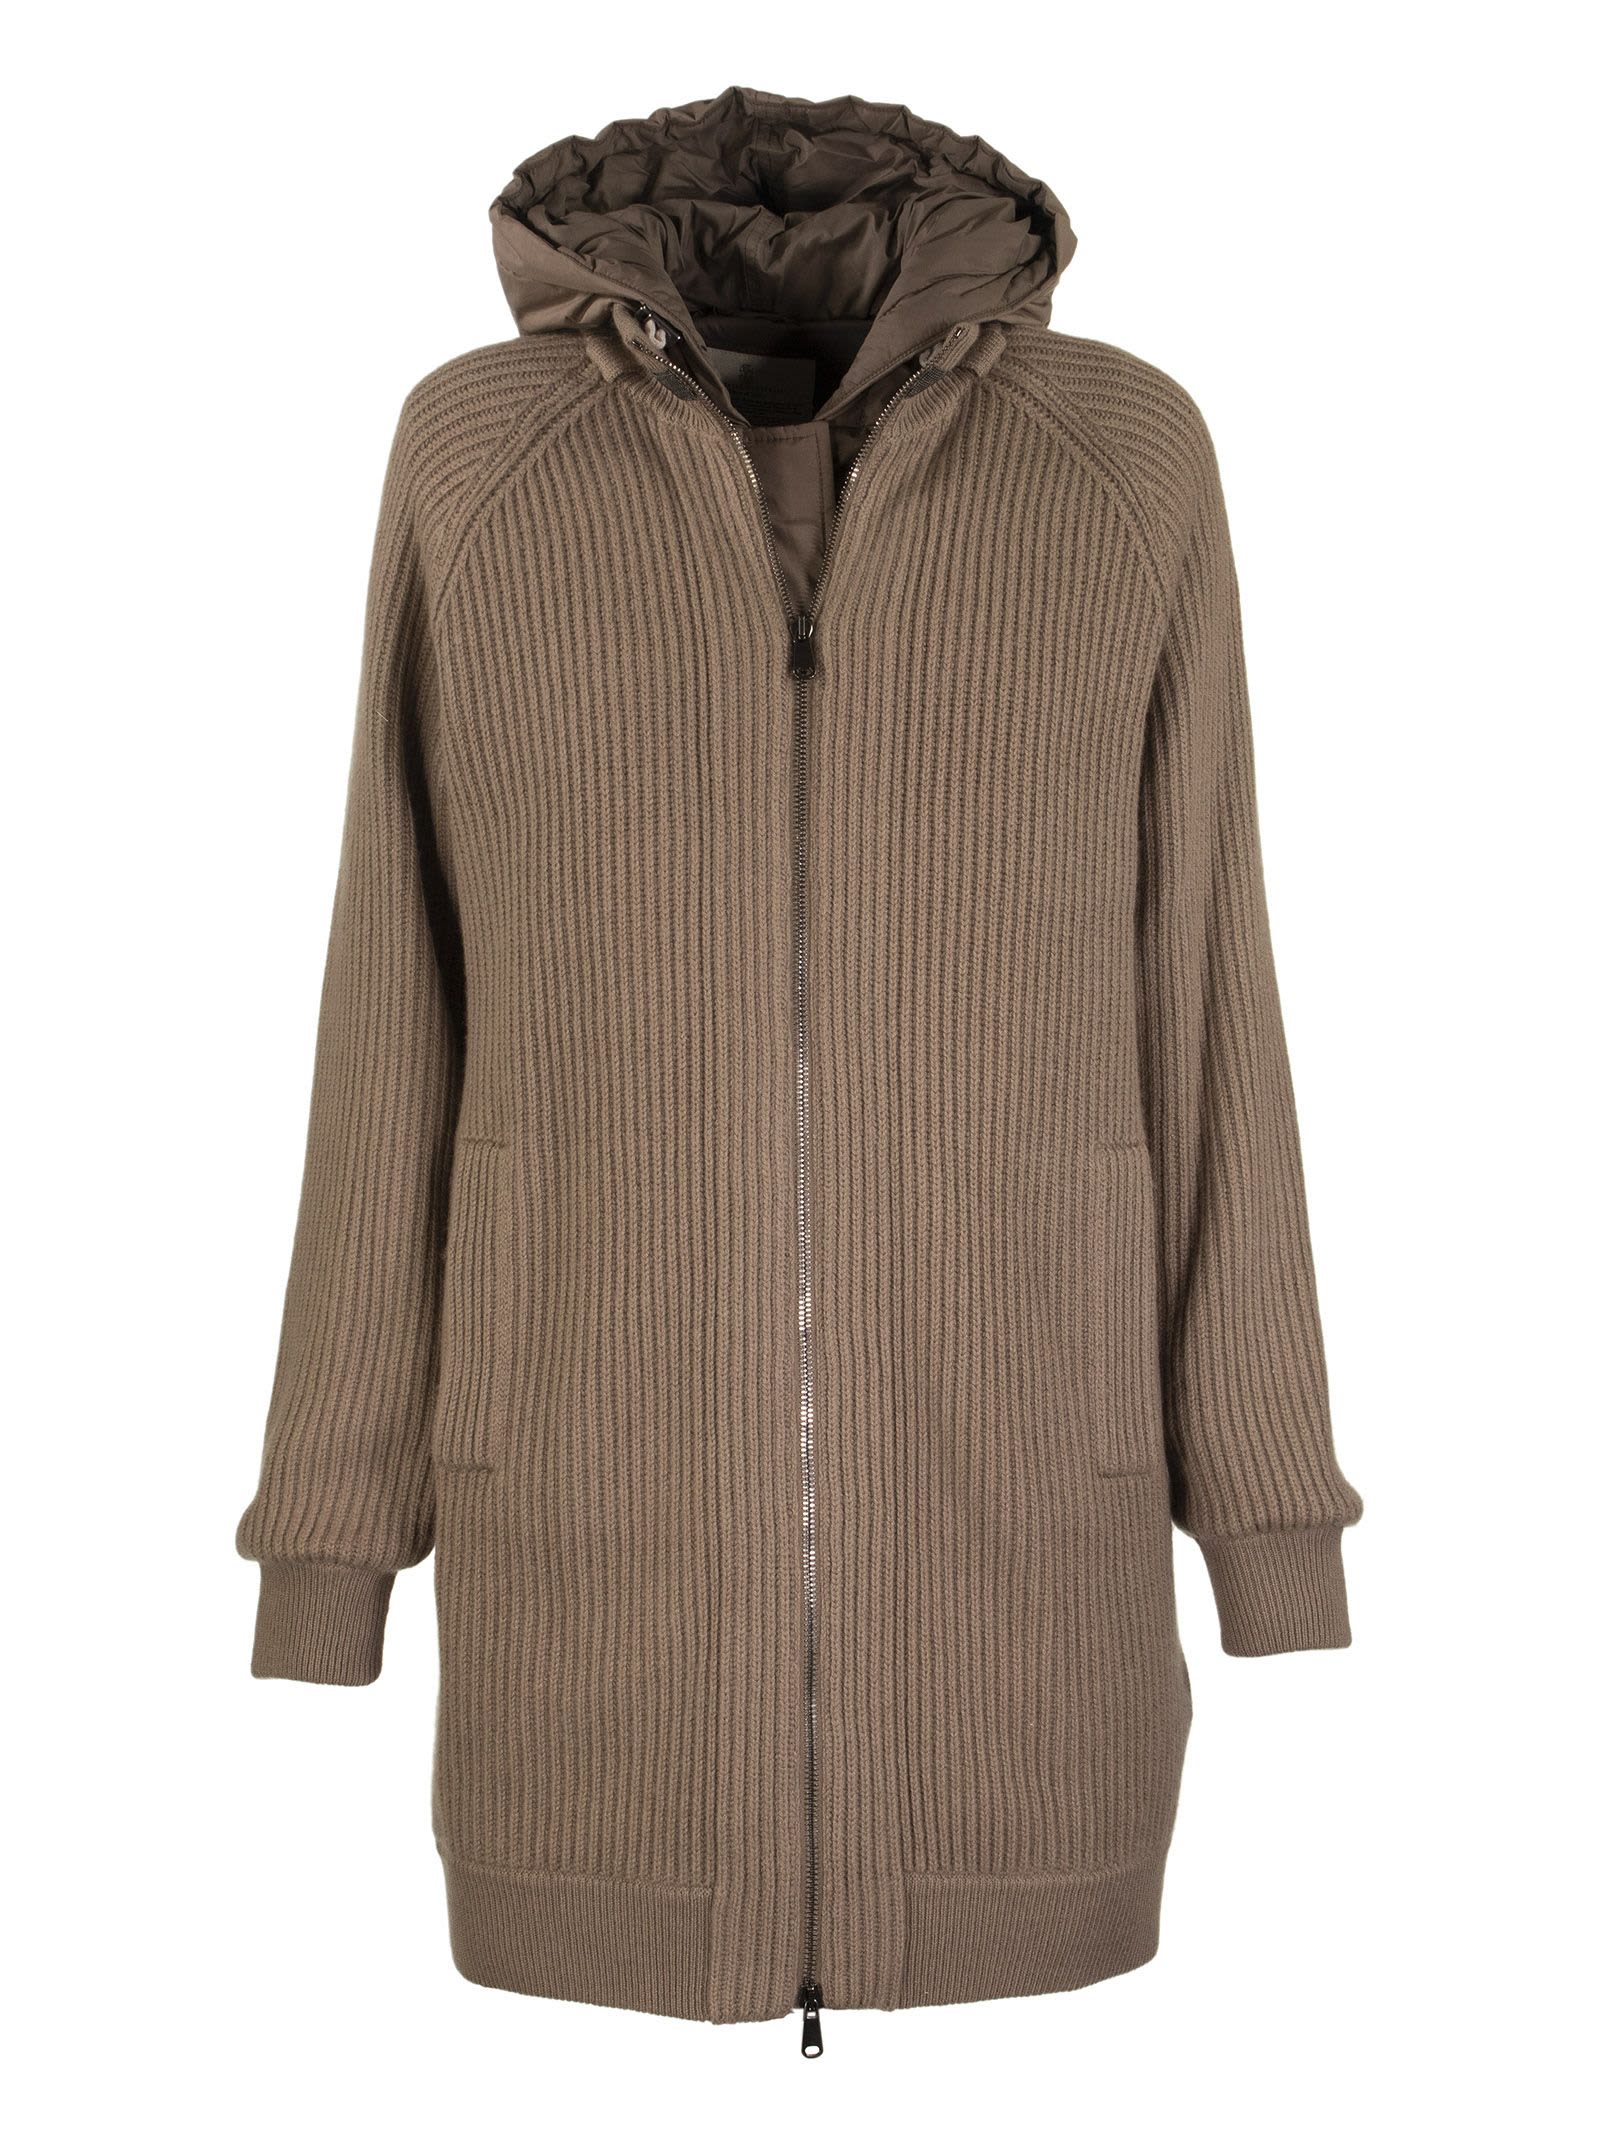 Brunello Cucinelli Knit Outerwear Cashmere Rib Knit Outerwear Jacket With Monili And Detachable Down Vest